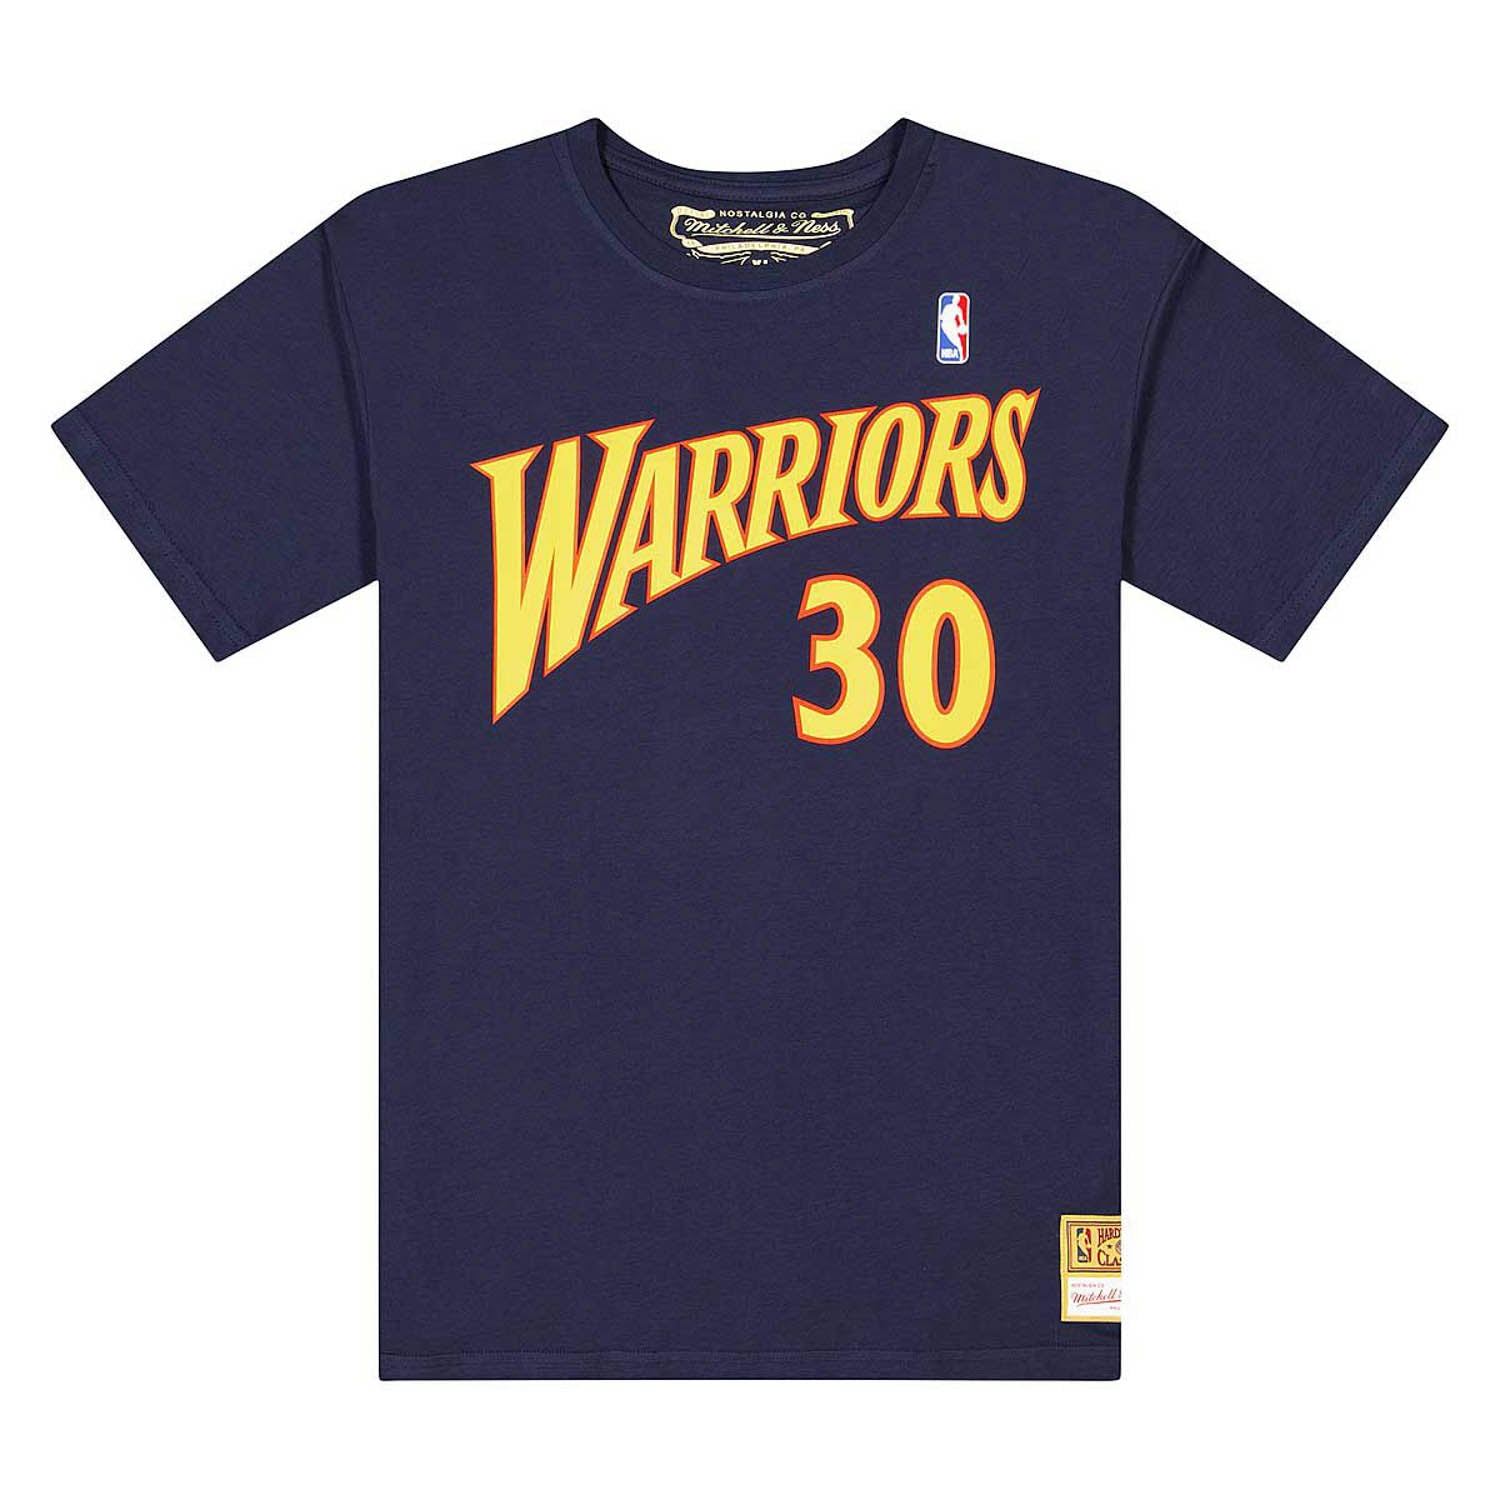 S2 Sneakers Specialist Mitchell & Ness NBA TEE WARRIORS Stephen Curry